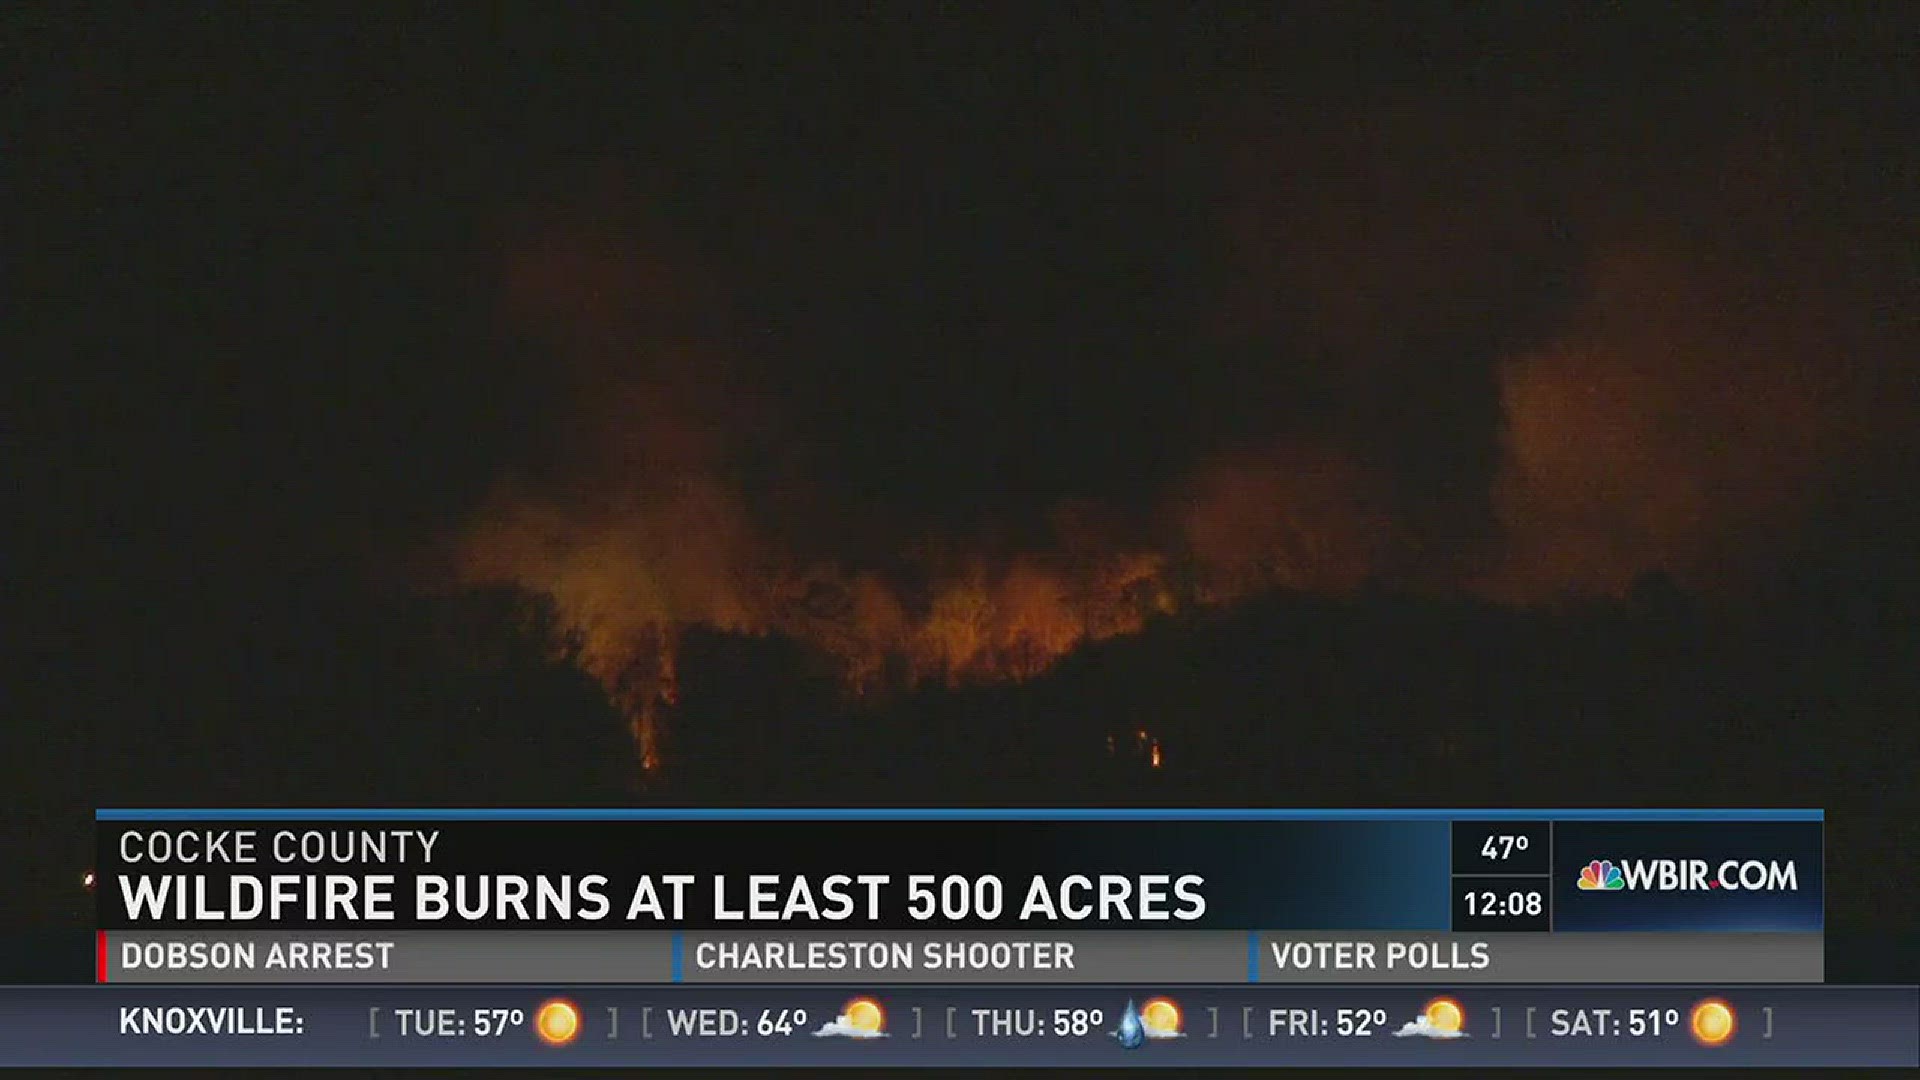 The burned through about 500 acres of land in Cocke County.